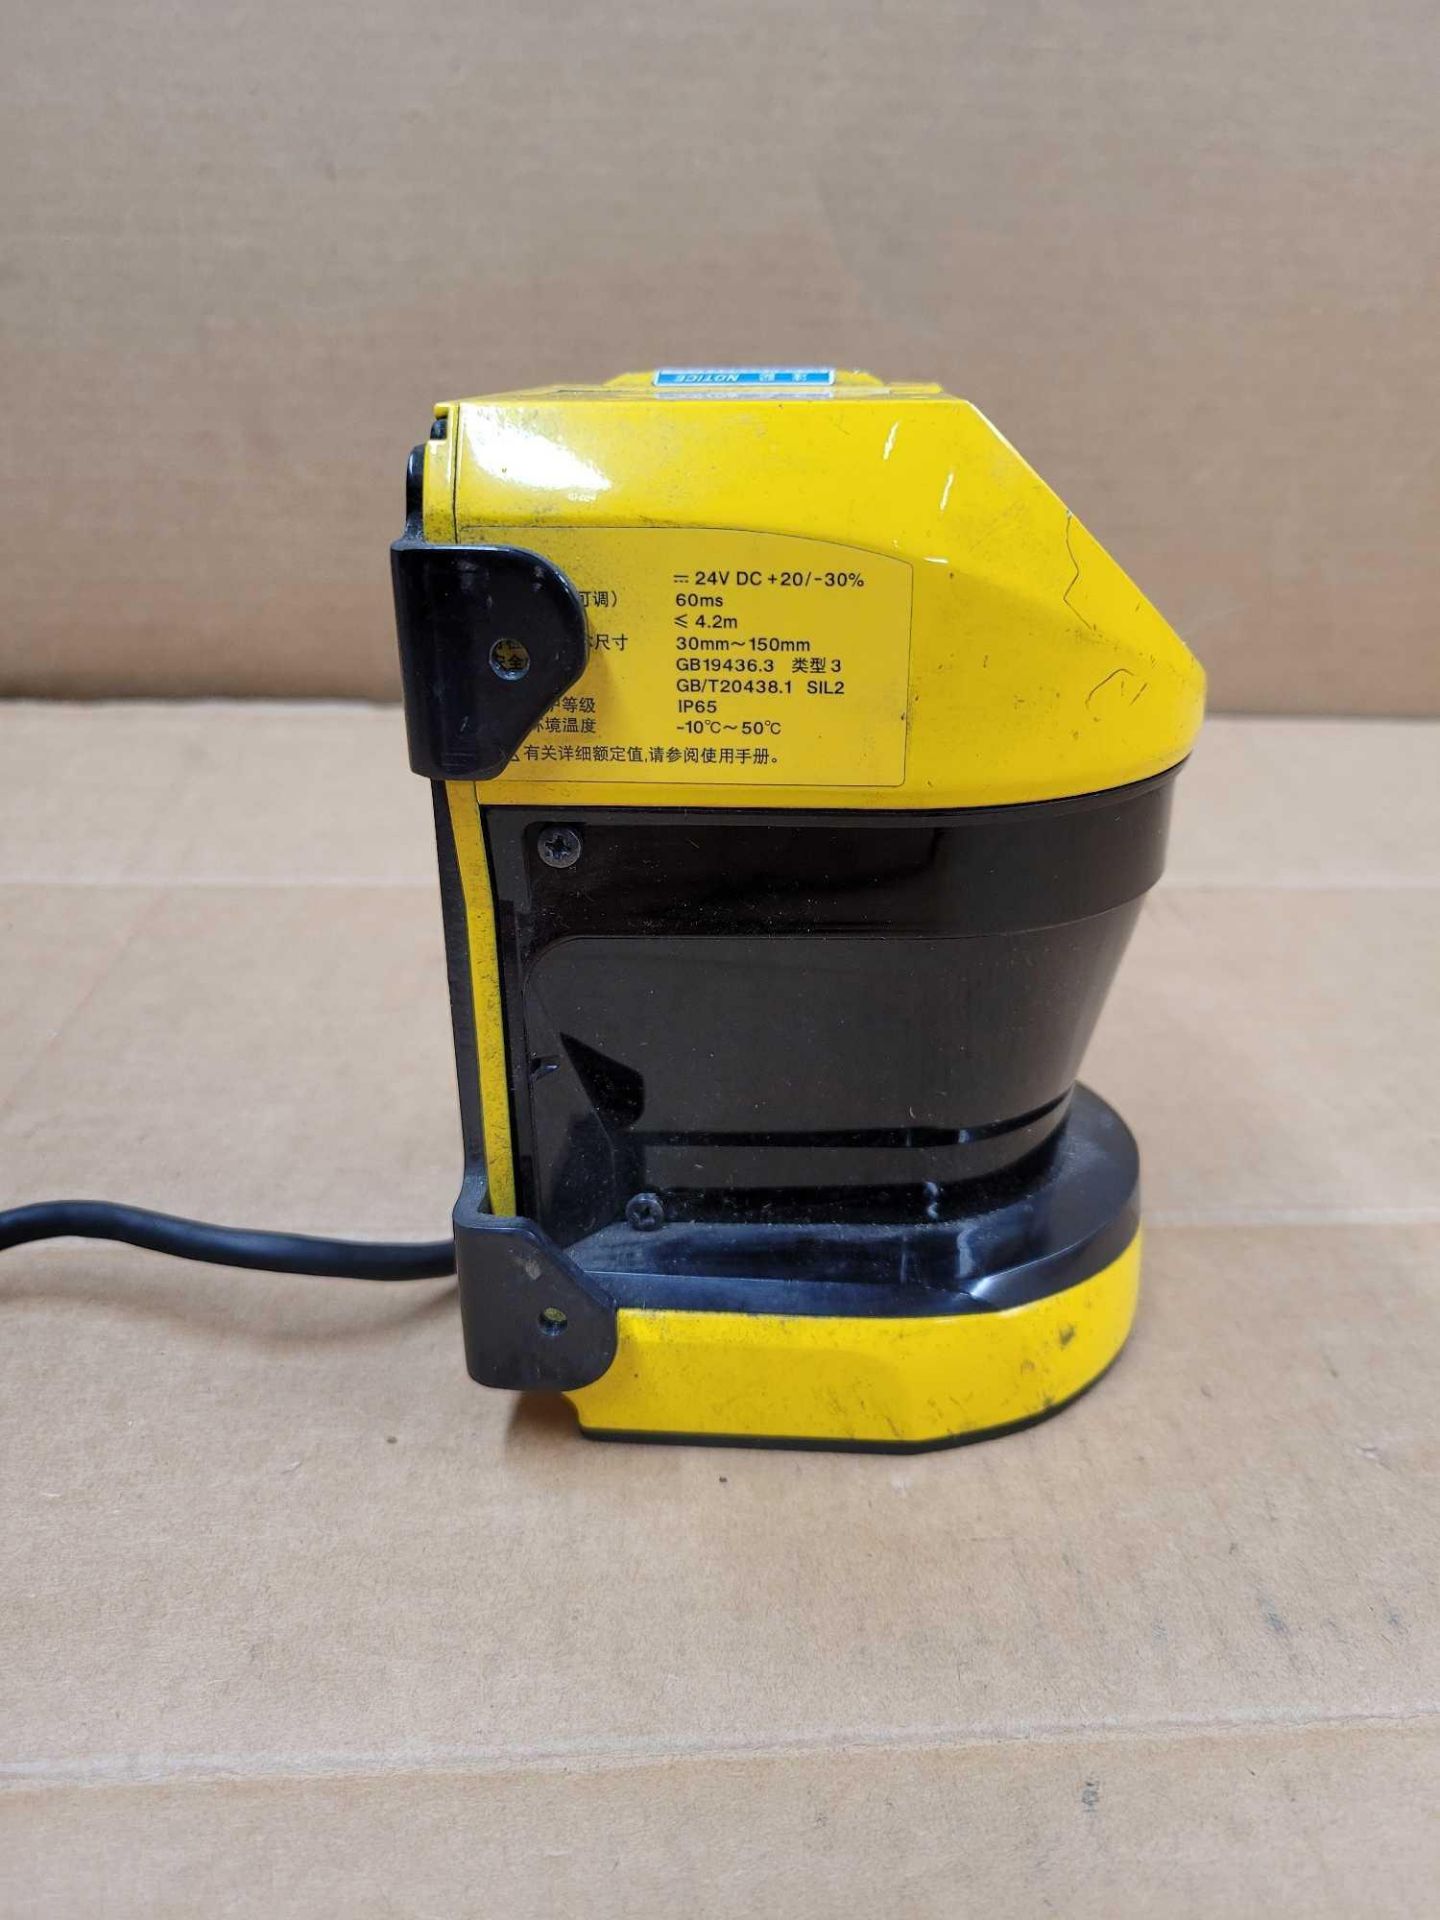 KEYENCE SZ-16V / Safety Laser Scanner  /  Lot Weight: 4.2 lbs - Image 4 of 8